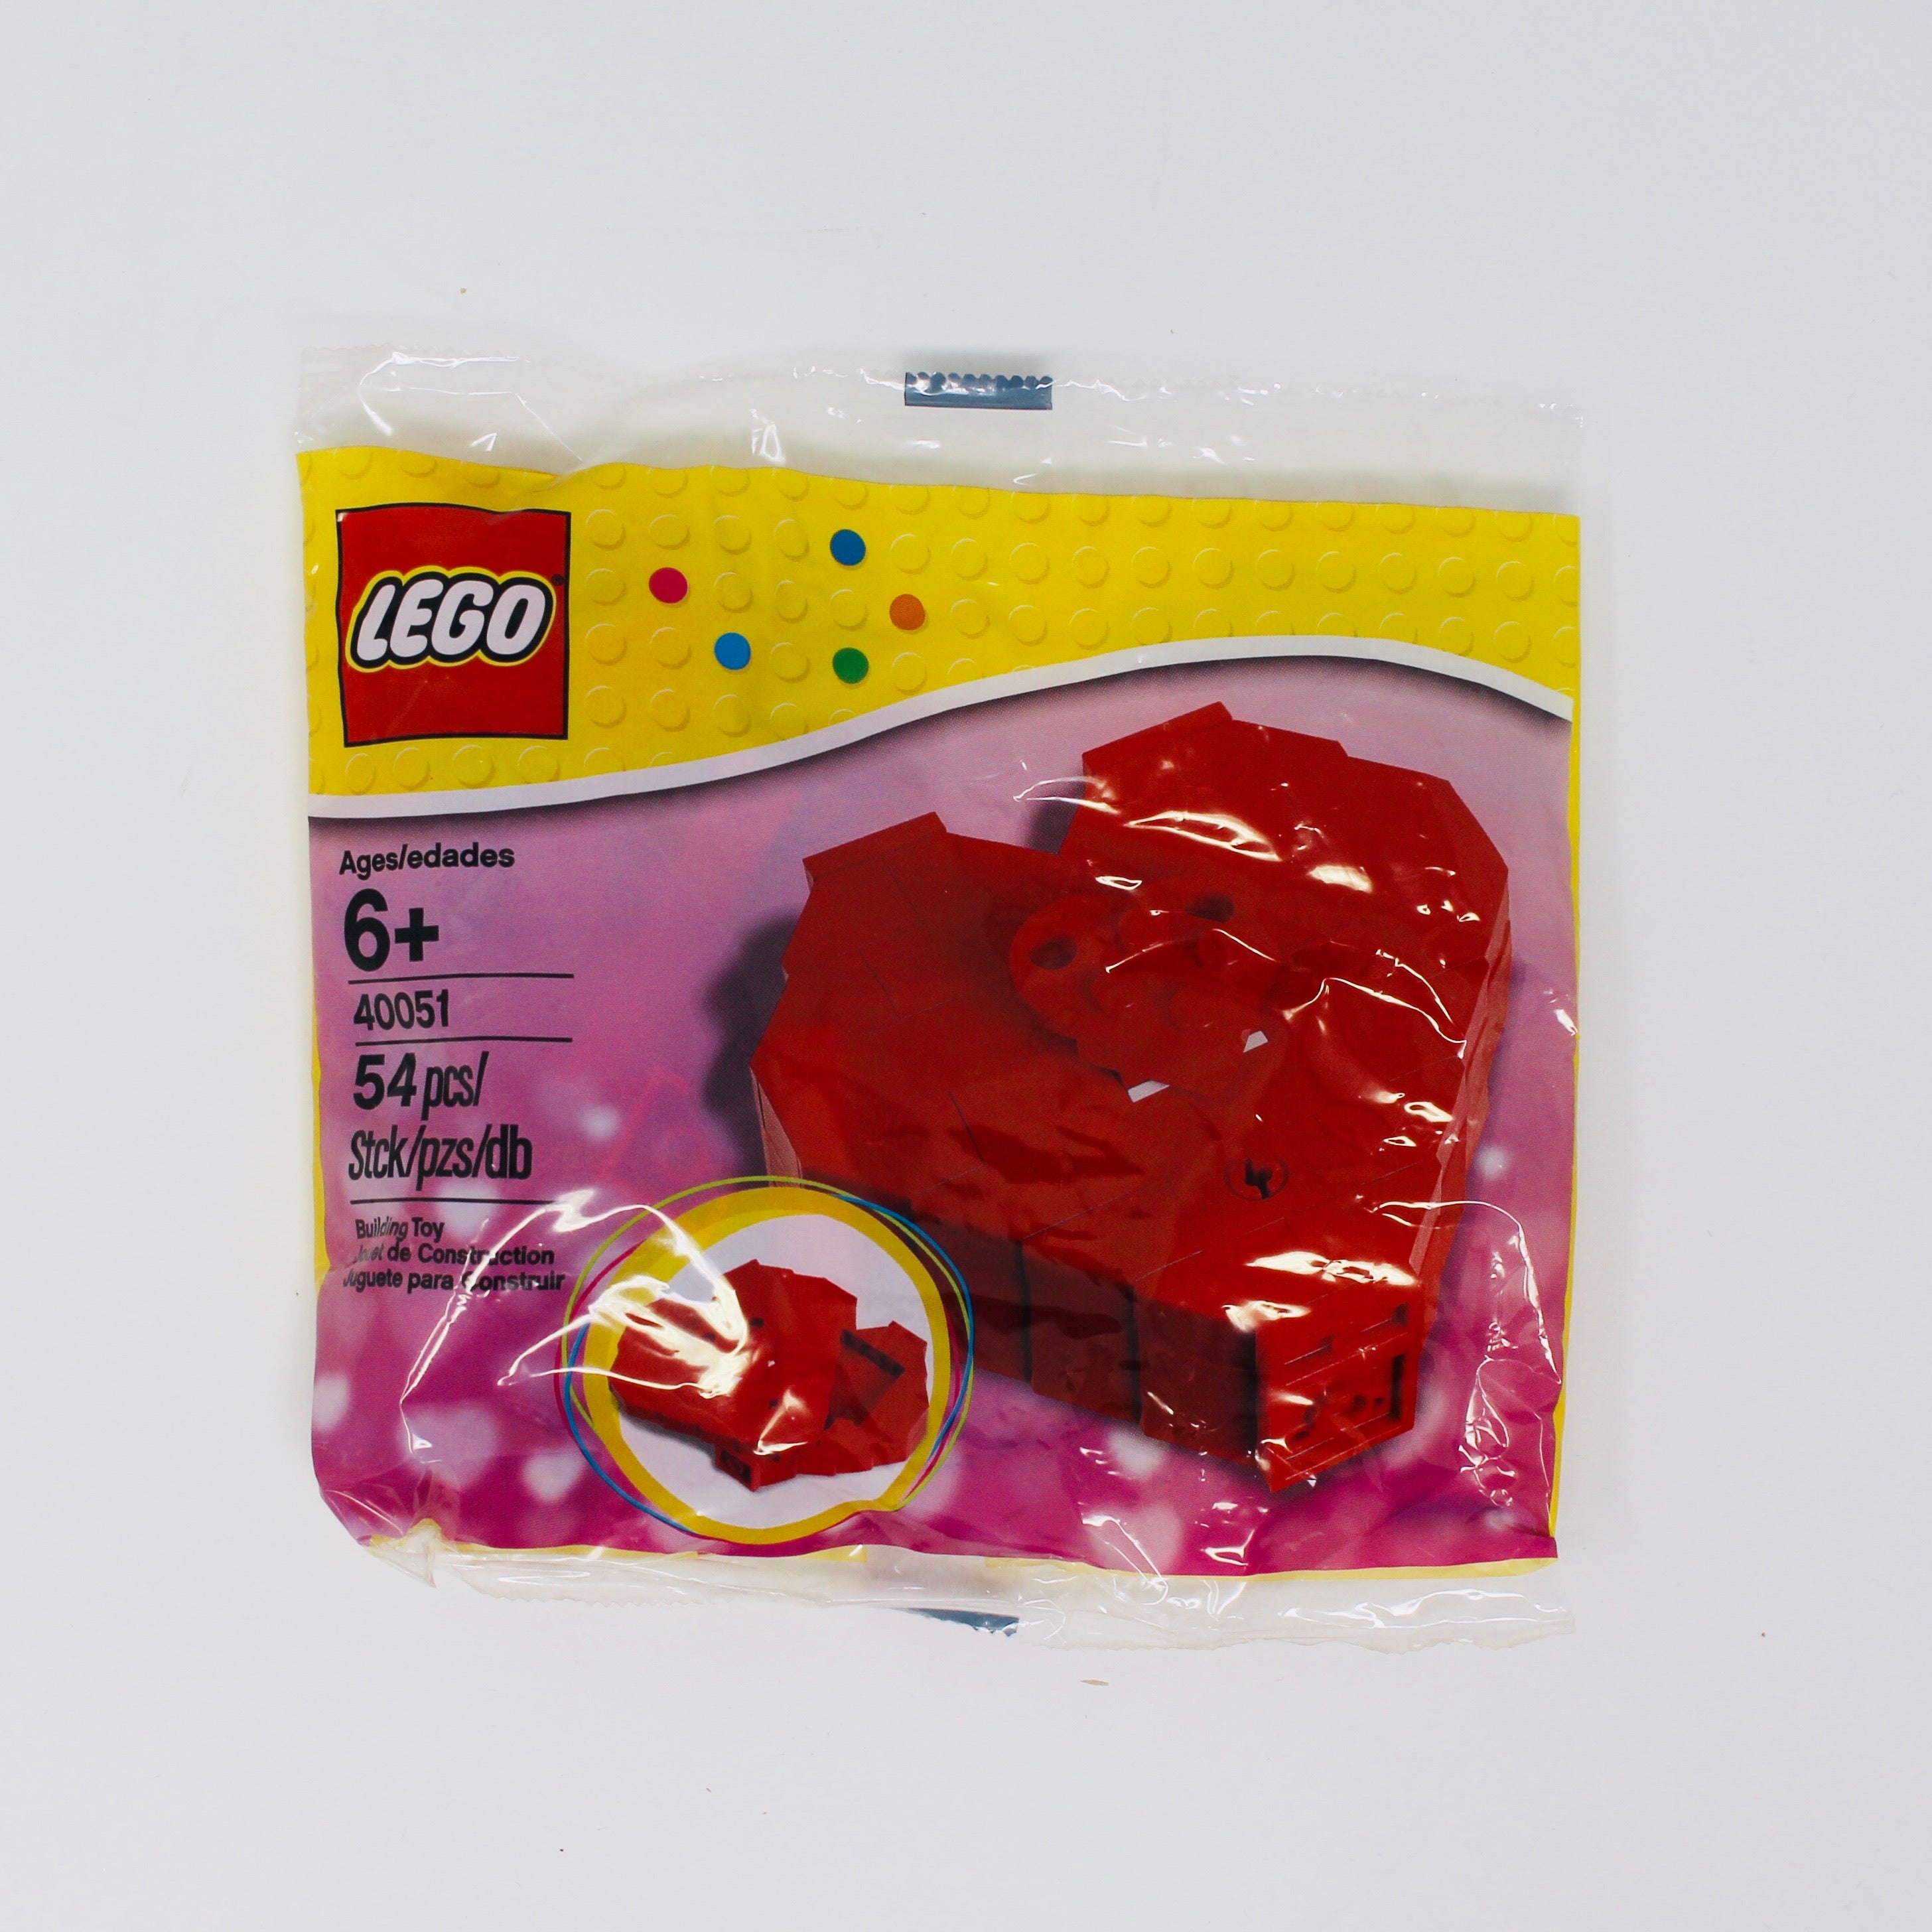 Polybag 40051 LEGO Valentines Day Heart Box